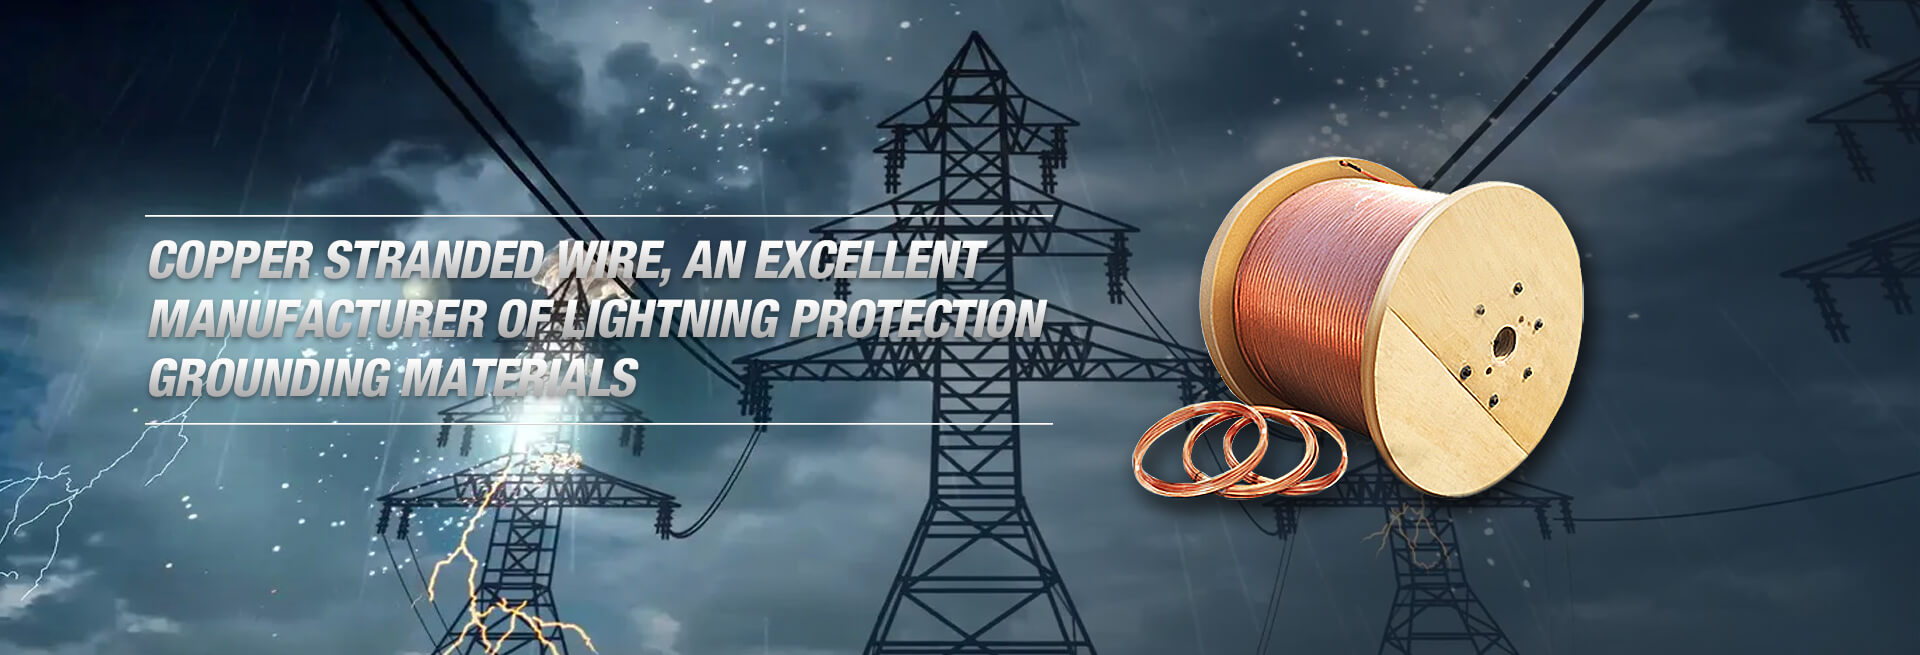 COPPER STRANDED WIRE Manufacturers